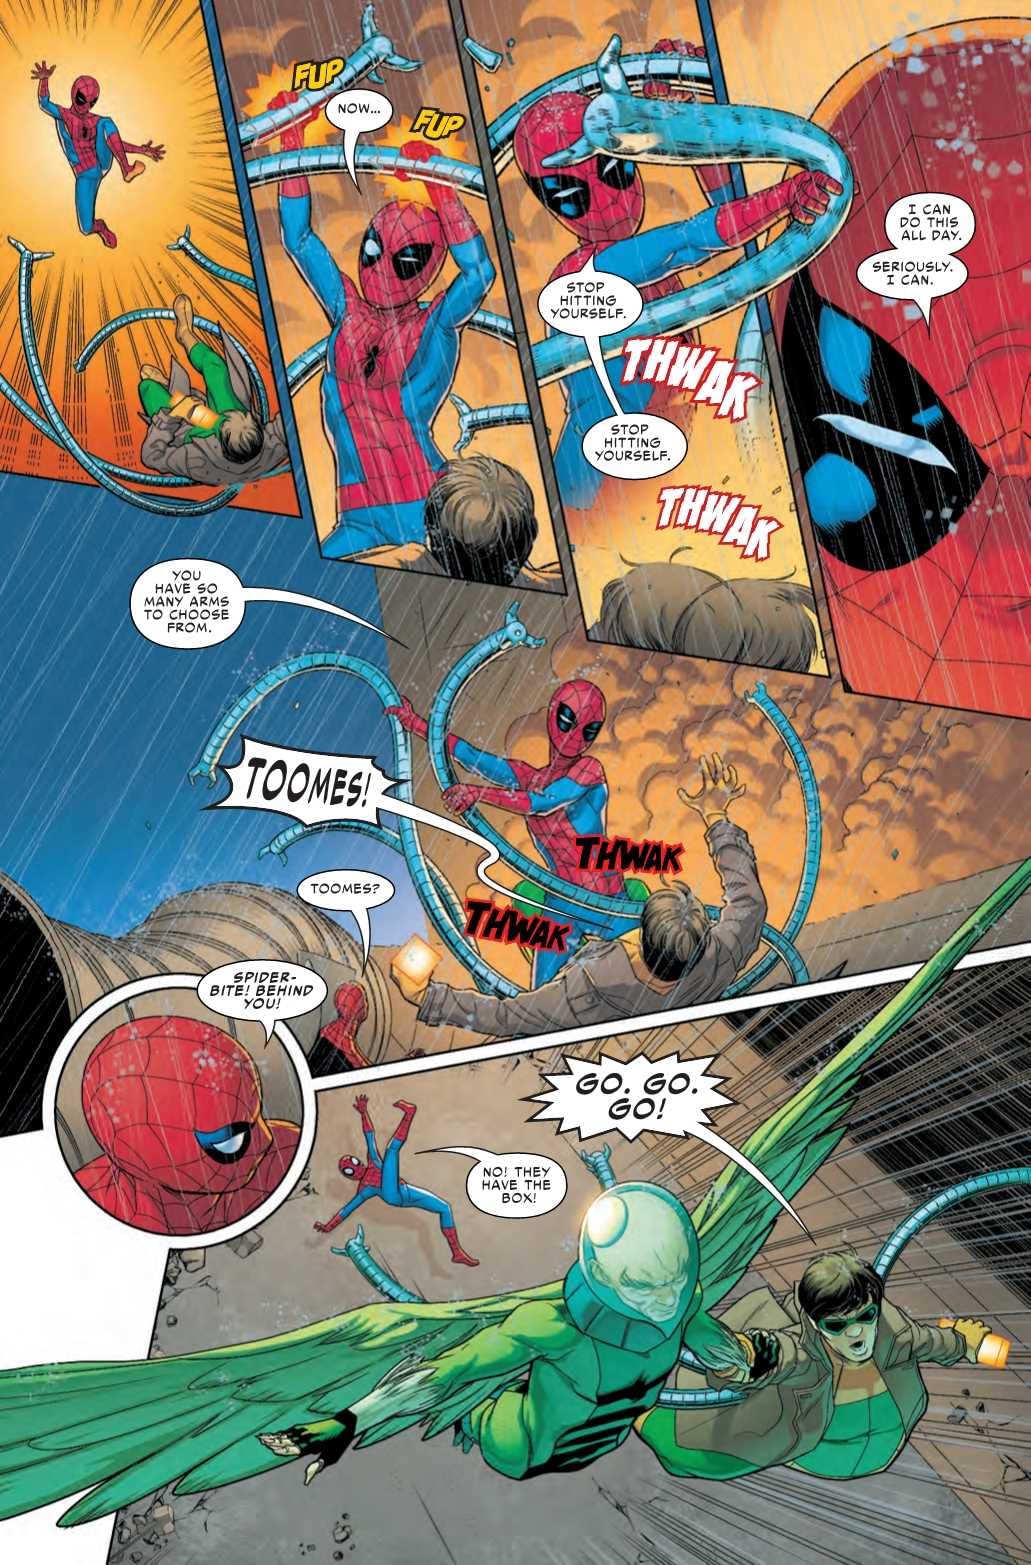 Meet Spider-Man's 9 1/2 Year Old Sidekick in This Friendly Neighborhood Spider-Man #6 Preview